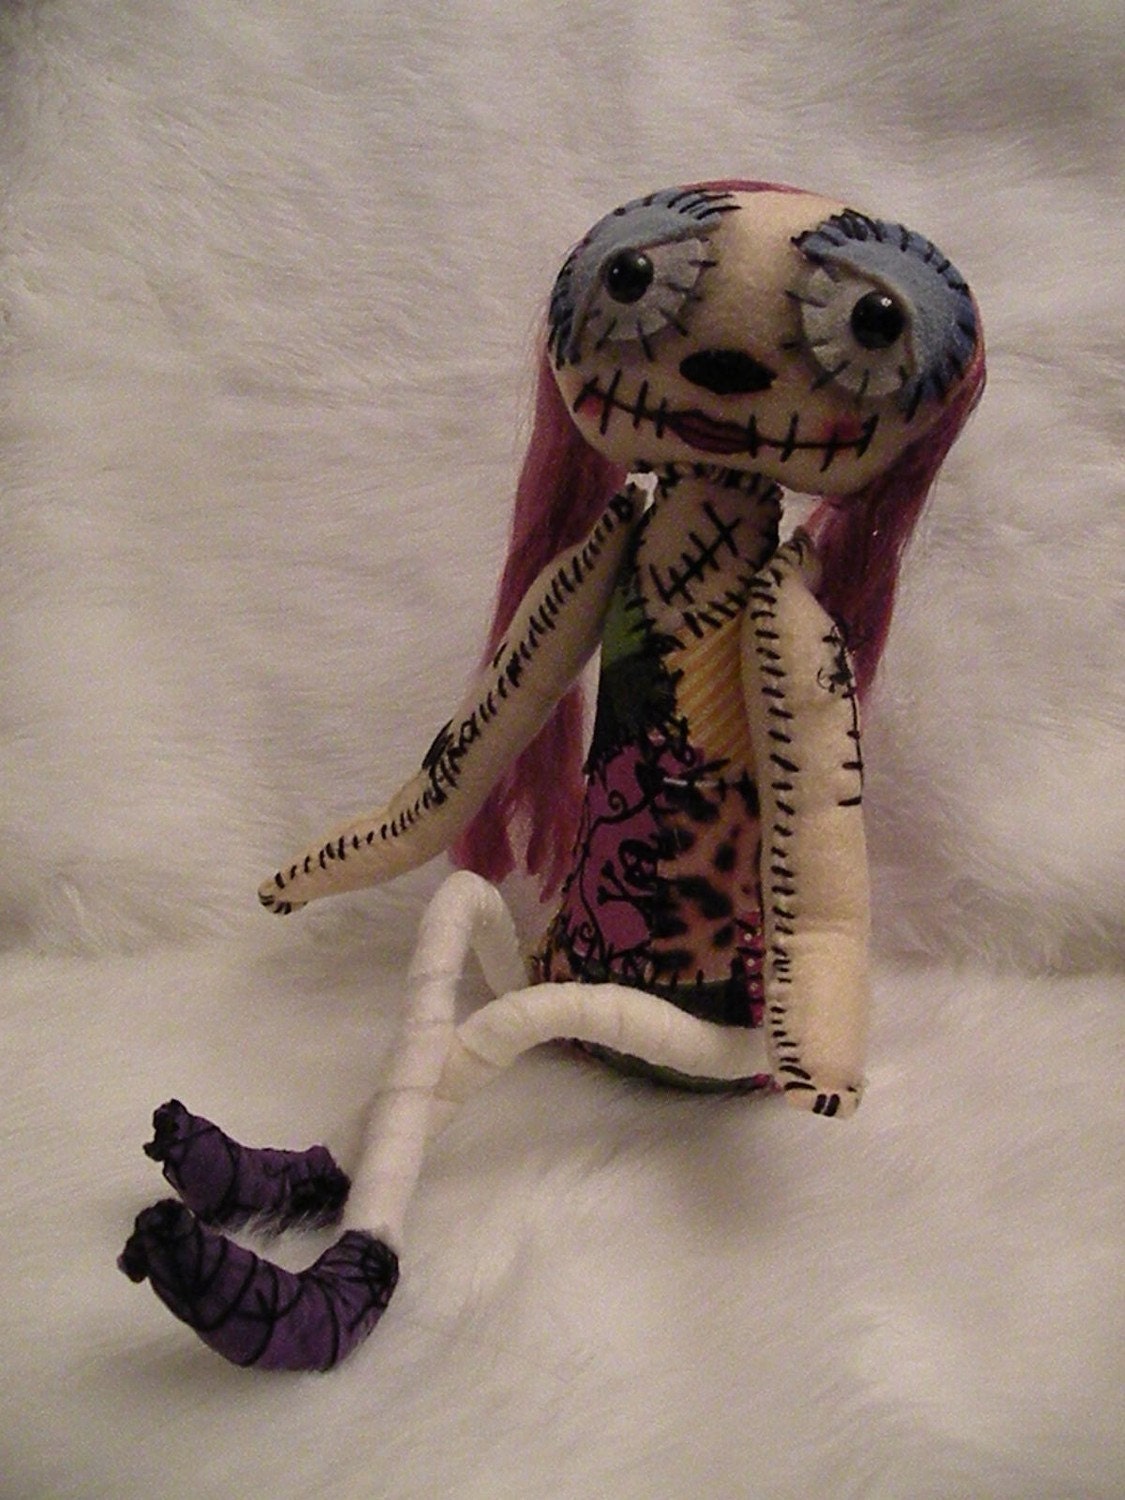 Sally from The Nightmare Before Christmas - Made to Order